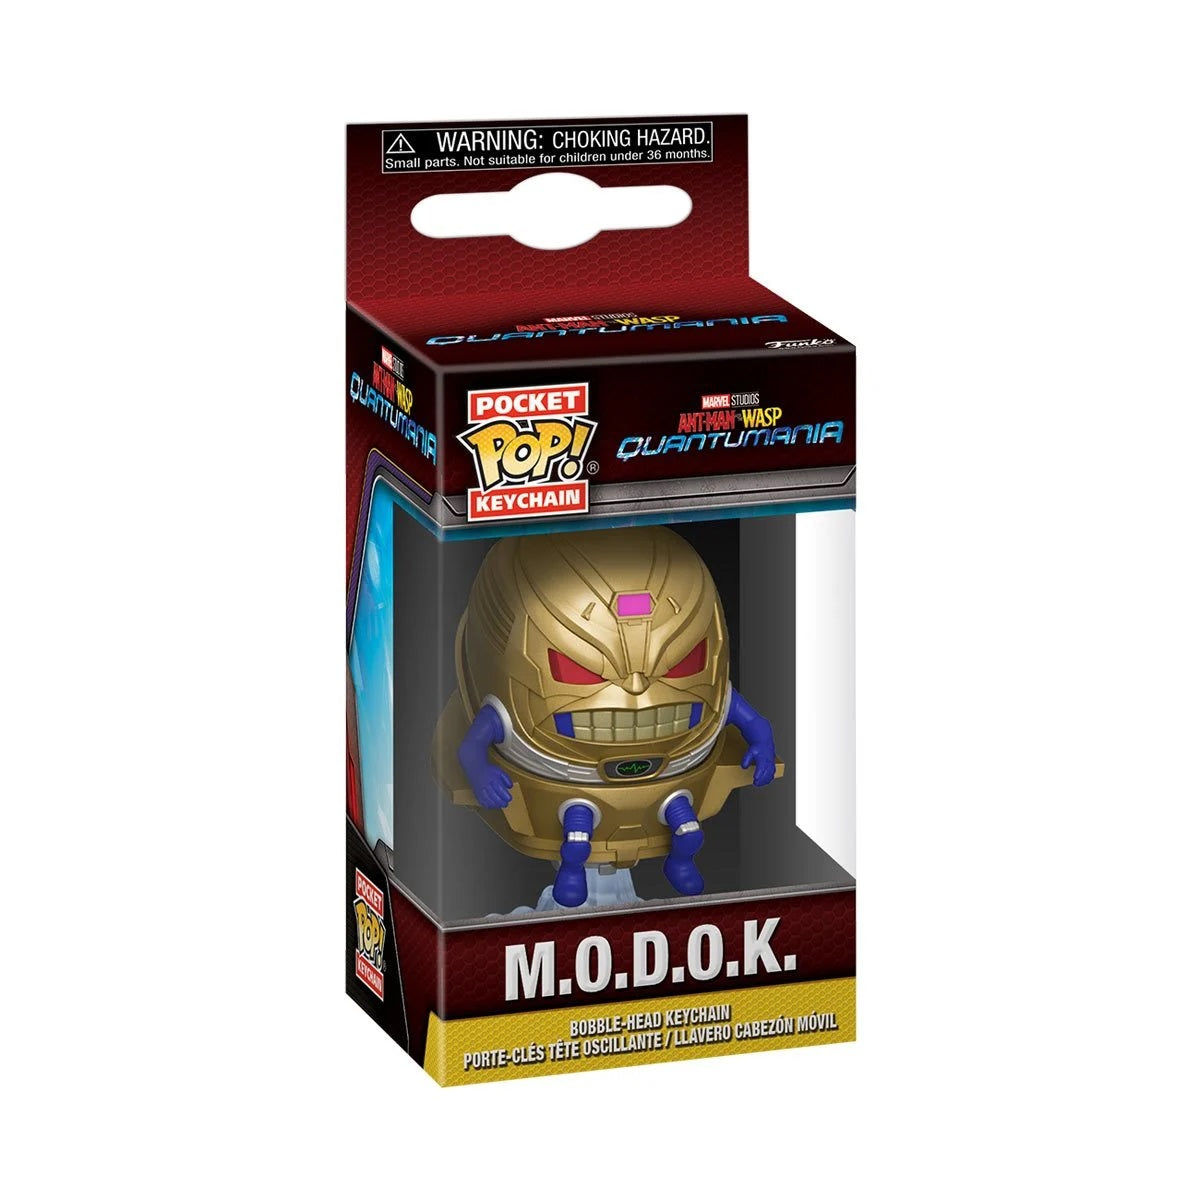 M.O.D.O.K. Ant-Man and the Wasp: Quantumania Pocket Pop! Key Chain